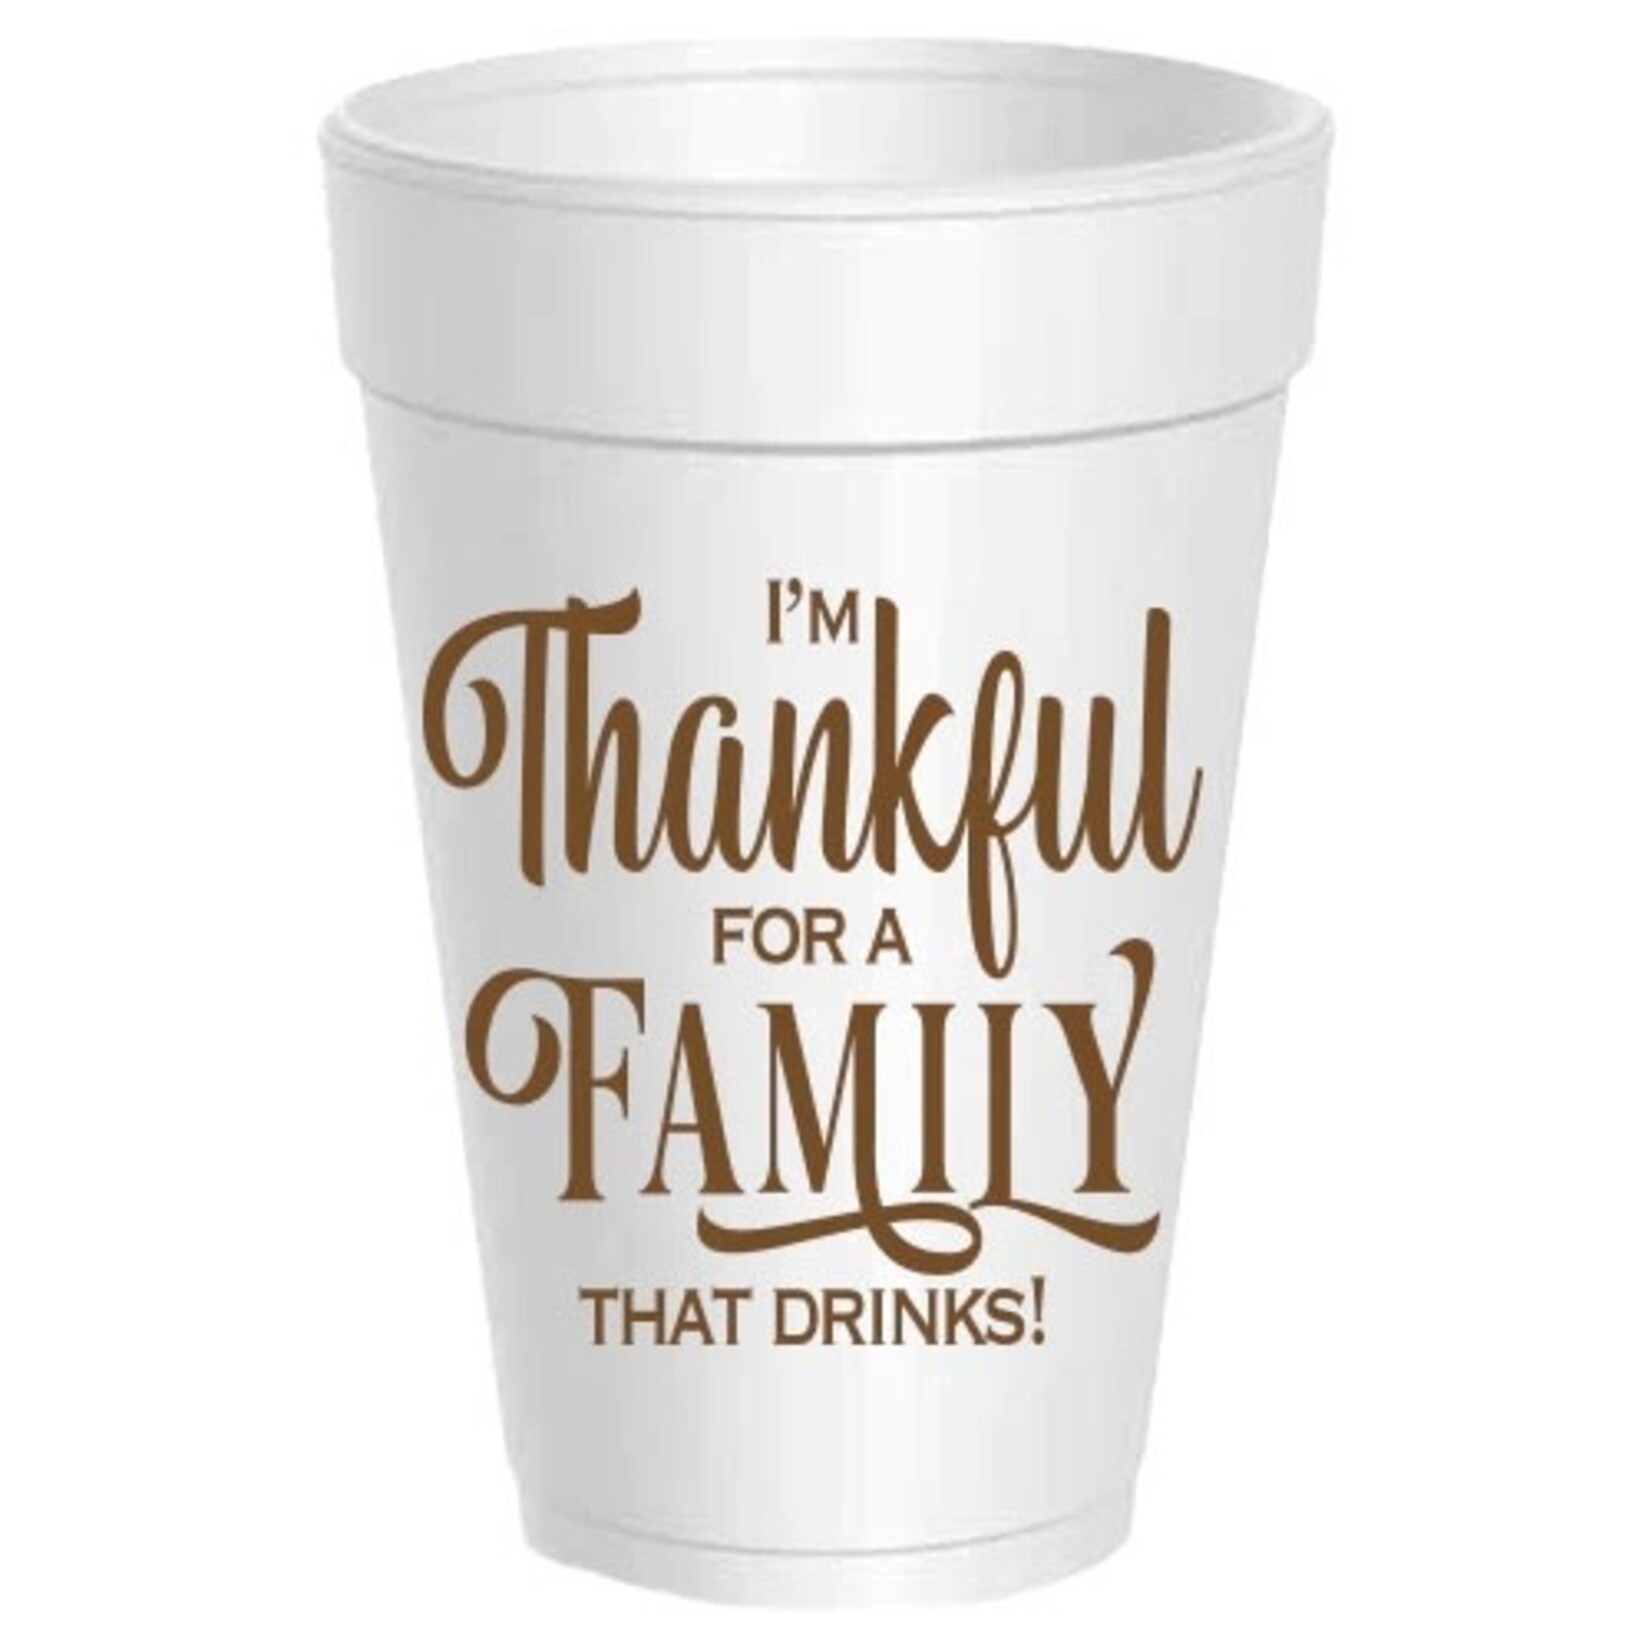 I'm Thankful for a Family That Drinks- Pack of 10 Cups